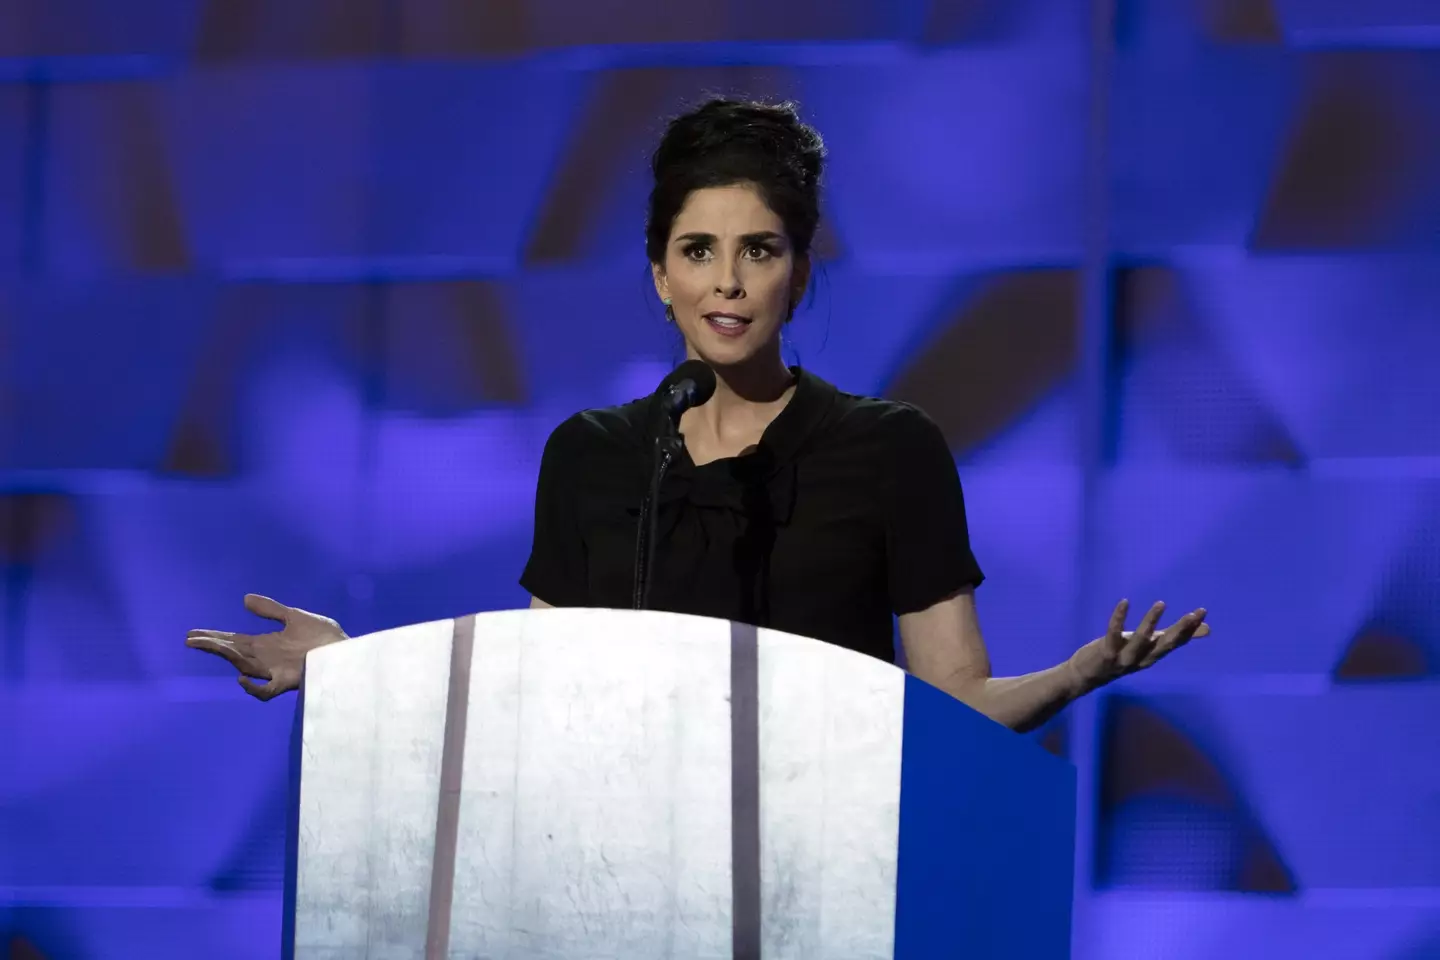 Sarah Silverman once took part in a sketch that saw her wear blackface.